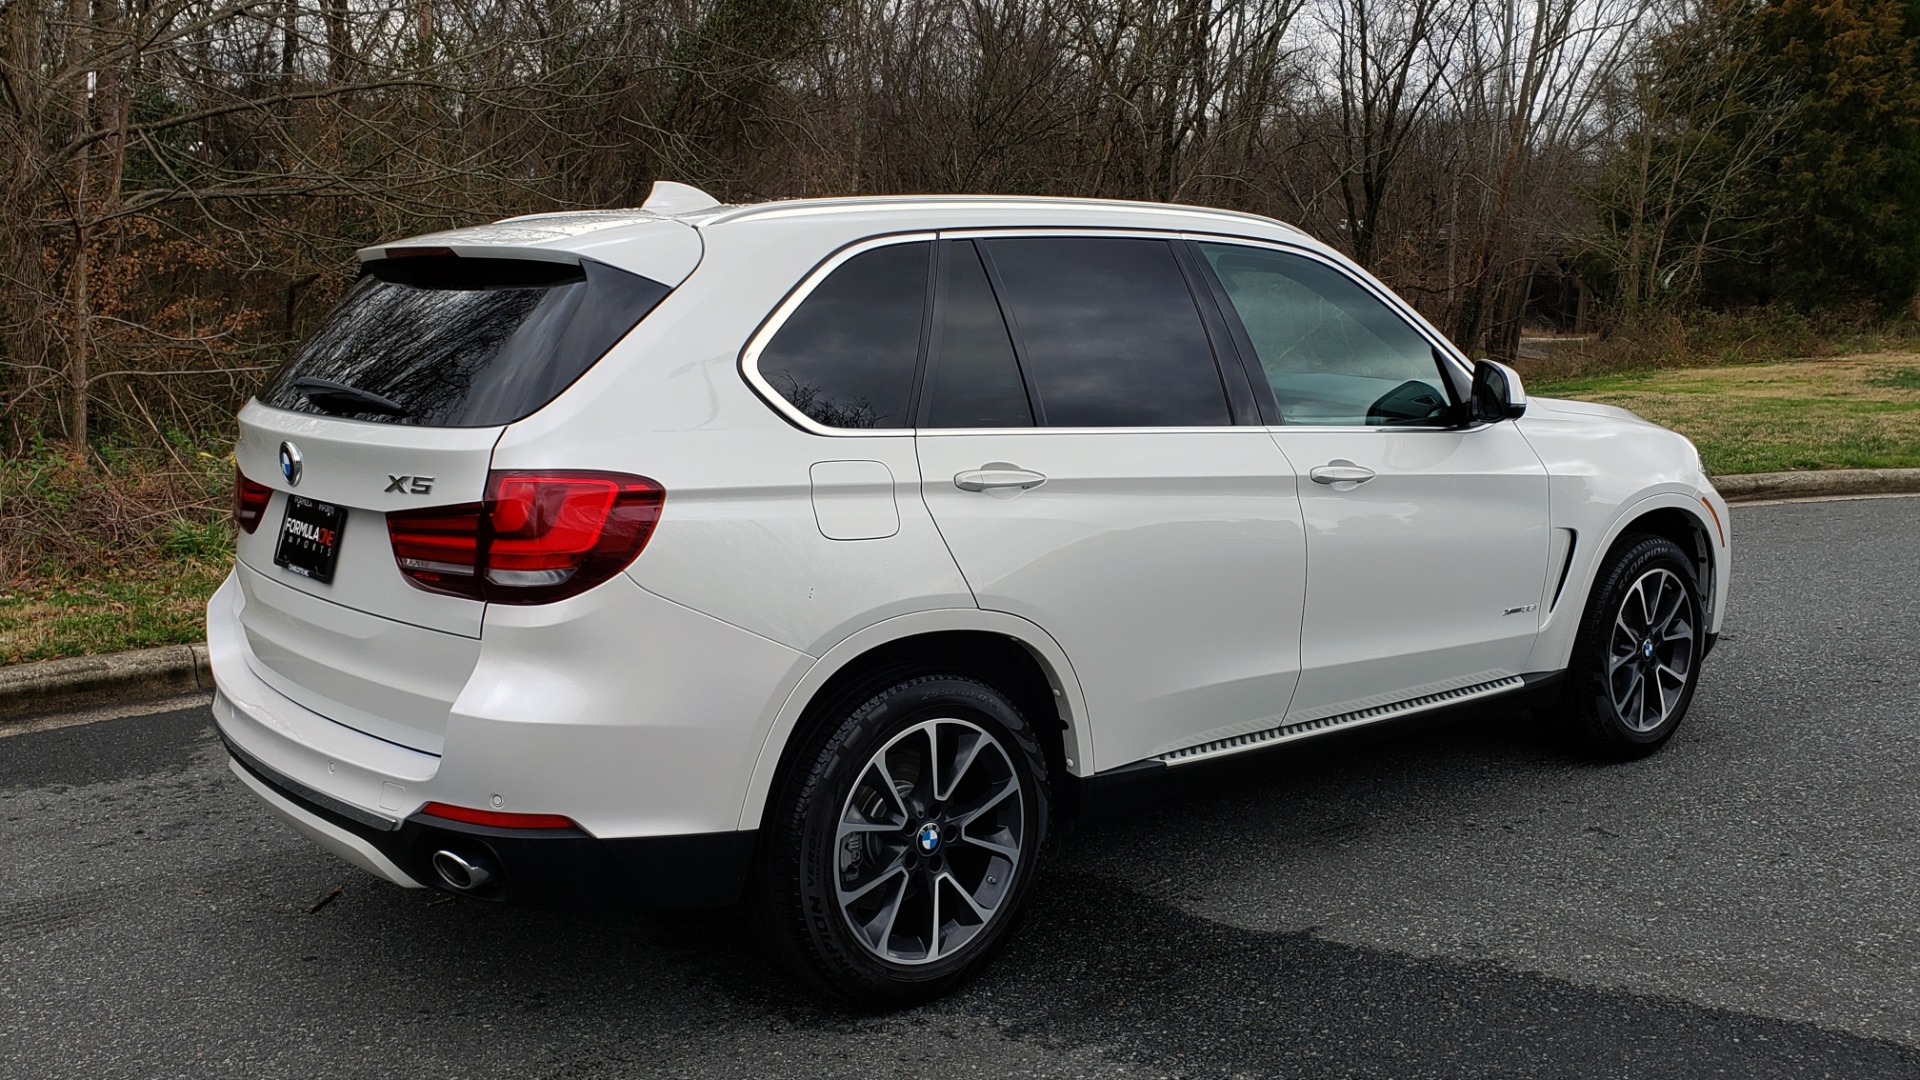 Used 2017 BMW X5 XDRIVE35I / NAV / HUD / DRVR ASST / SUNROOF / REARVIEW for sale Sold at Formula Imports in Charlotte NC 28227 6